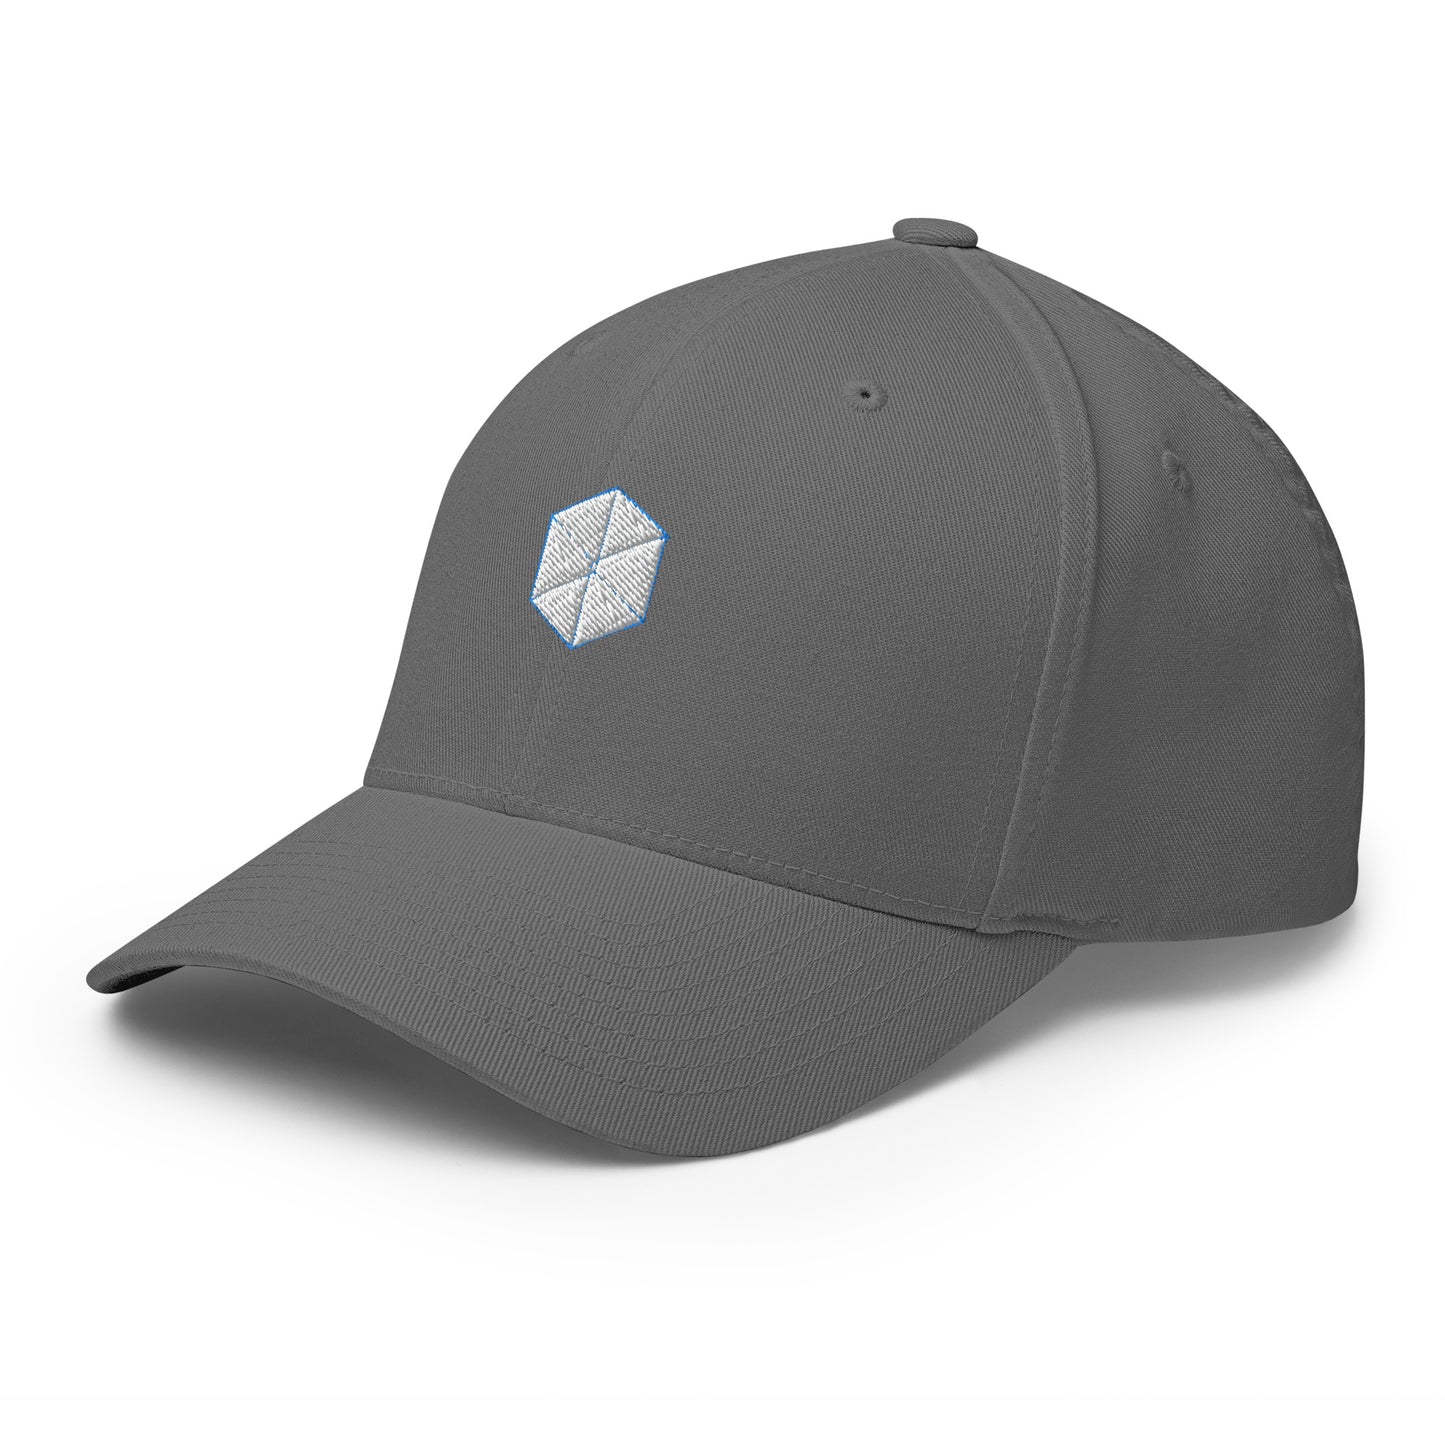 cap-from-the-front-with-geometric-shape-symbol